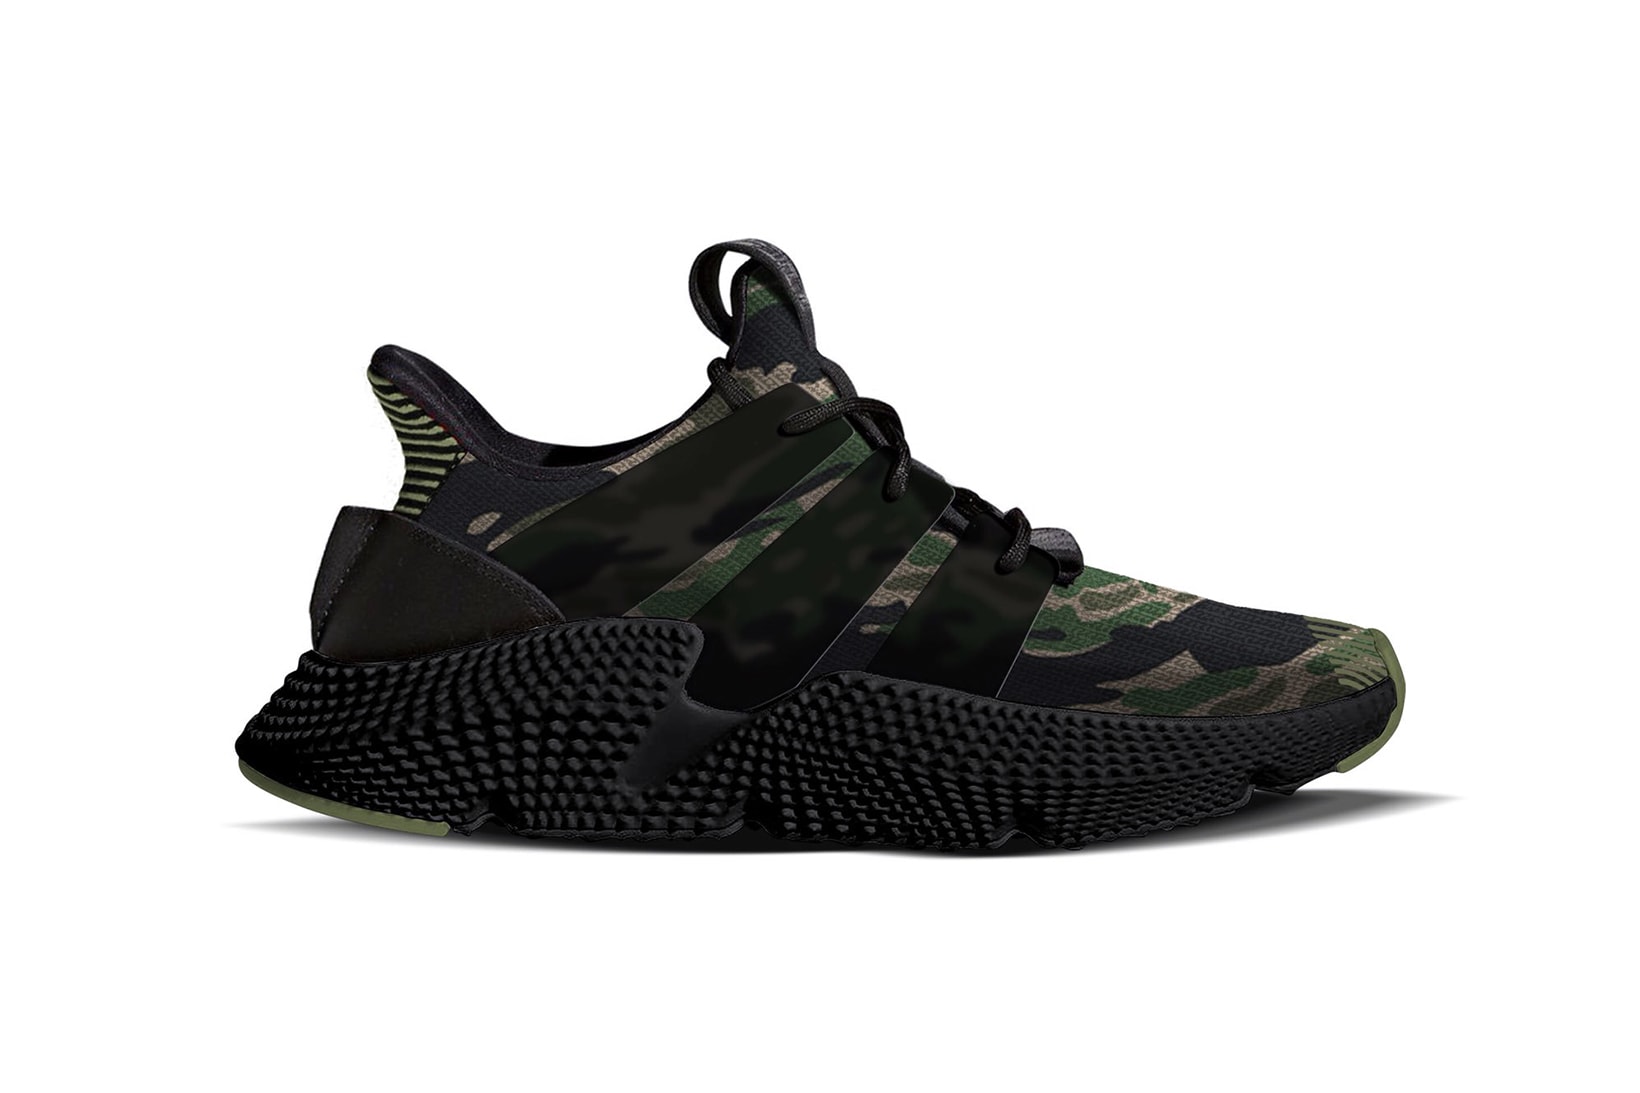 UNDEFEATED adidas Originals Prophere Camo Camouflage First Look 2017 December 16 23 Release Date Info Sneakers Shoes Footwear